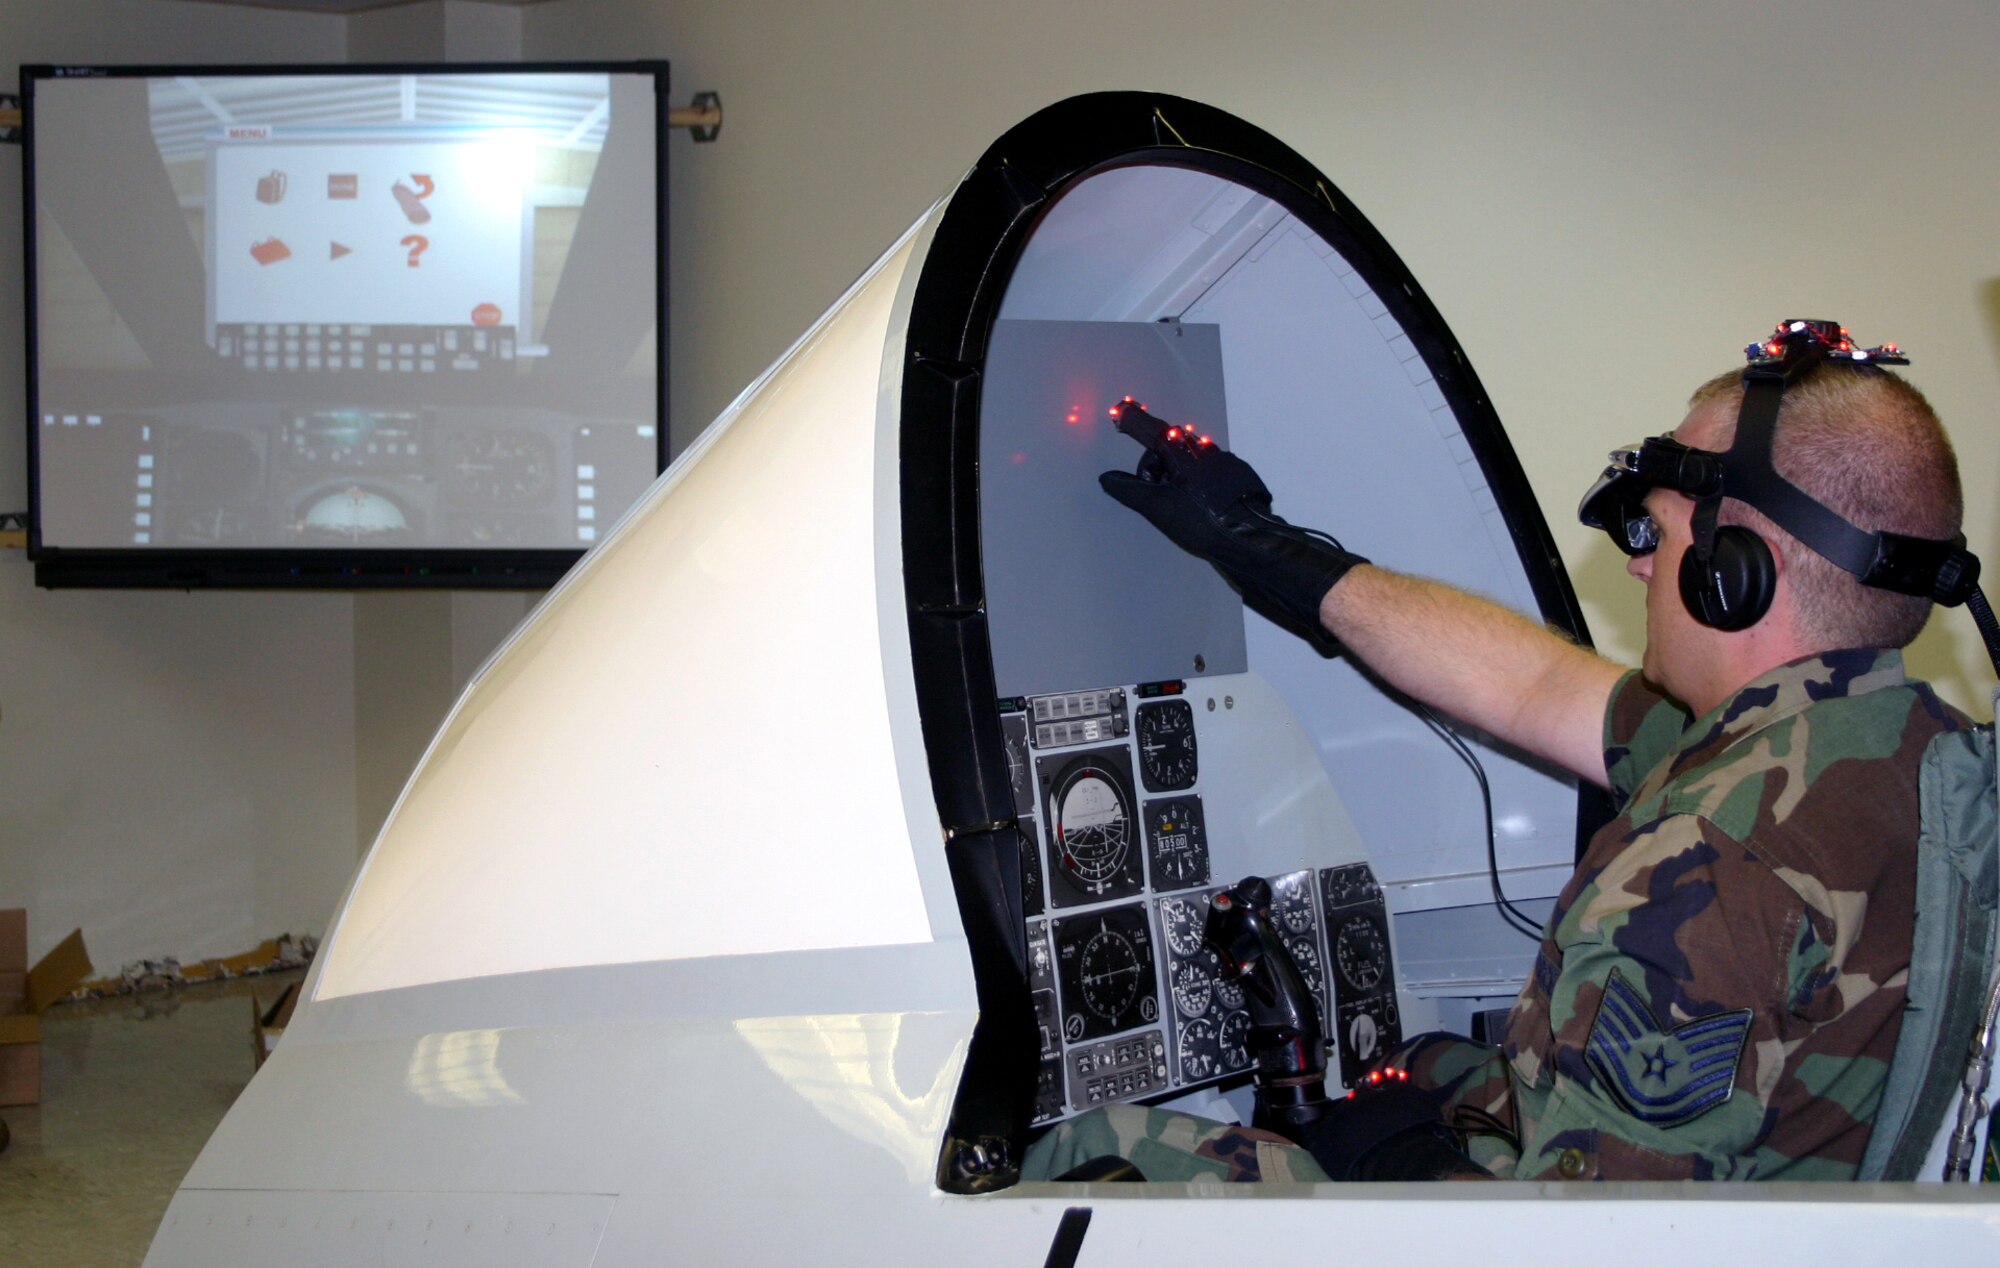 While the trainer still displays the cockpit controls of an A-10, the Generalized Operations Simulation Environment program, pictured on screen, shows the cockpit of an A-10C, as well as a function menu for the program's user. (U.S. Air Force photo/Staff Sgt. Tonnette Thompson)